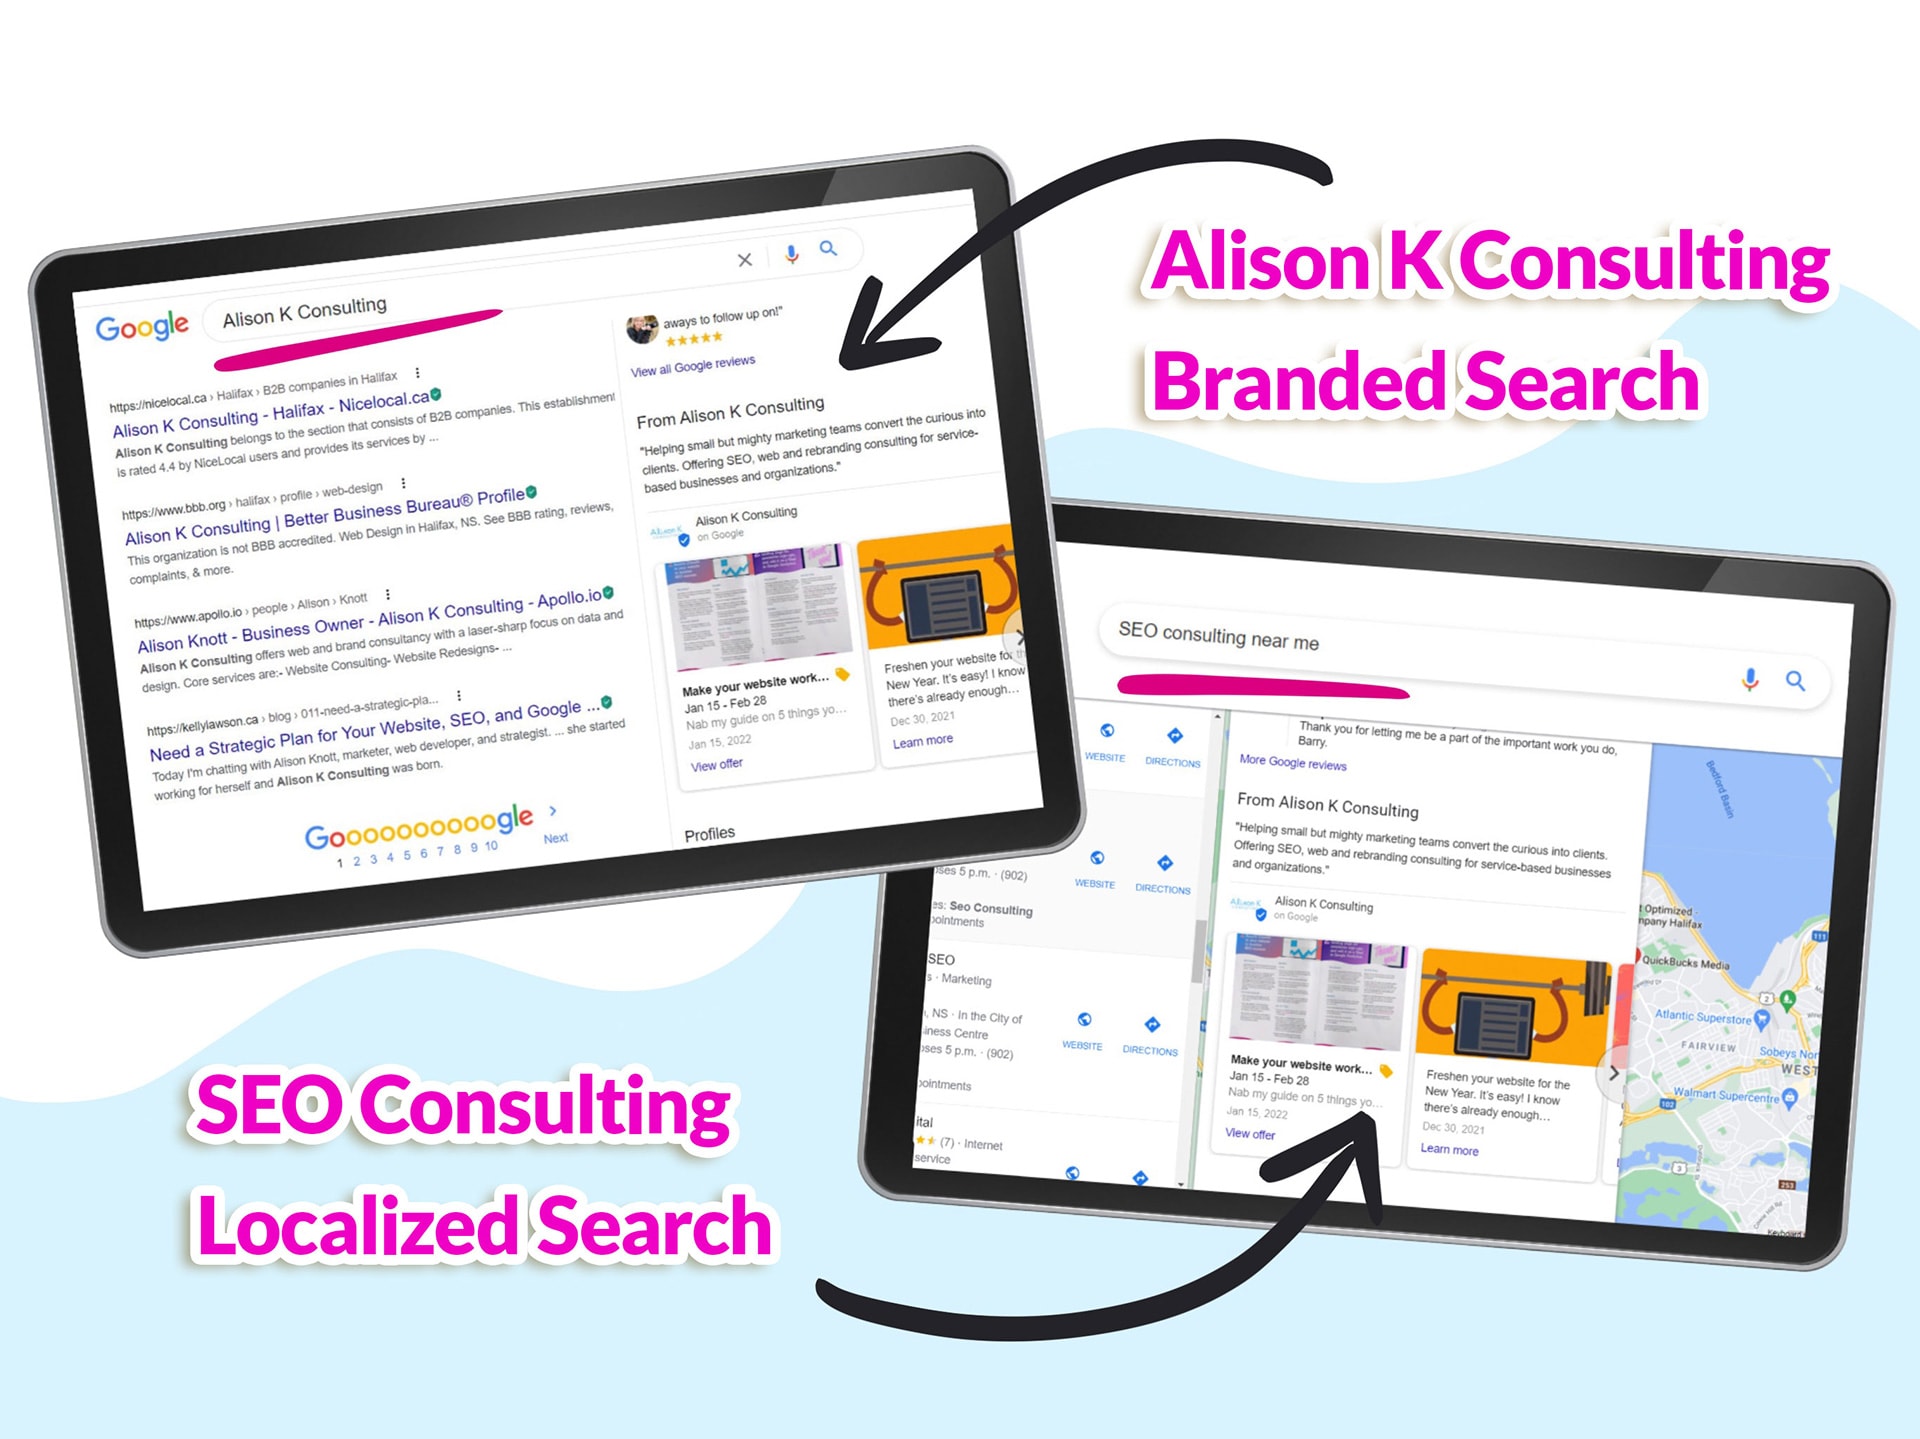 Mock up of what happens when you search for Alison K Consulting vs. SEO consultant near me to demonstrate Branded and Localized searches.